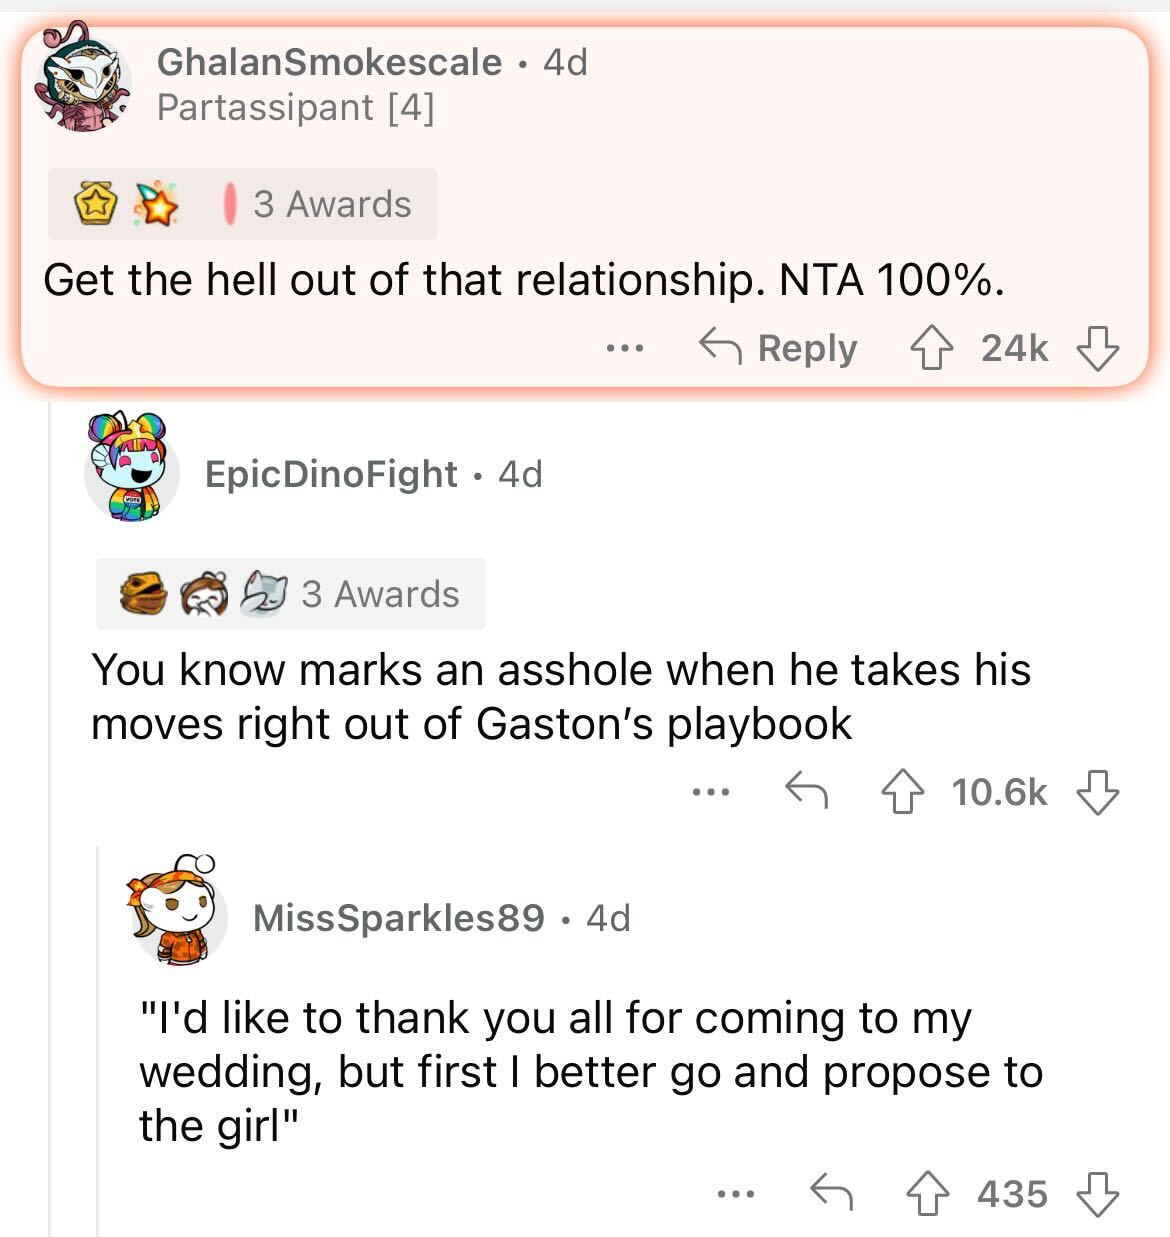 am i the asshole thread on reddit - document - GhalanSmokescale 4d Partassipant 4 3 Awards Get the hell out of that relationship. Nta 100%. 24k Min Epic DinoFight. 4d 3 Awards You know marks an asshole when he takes his moves right out of Gaston's playboo